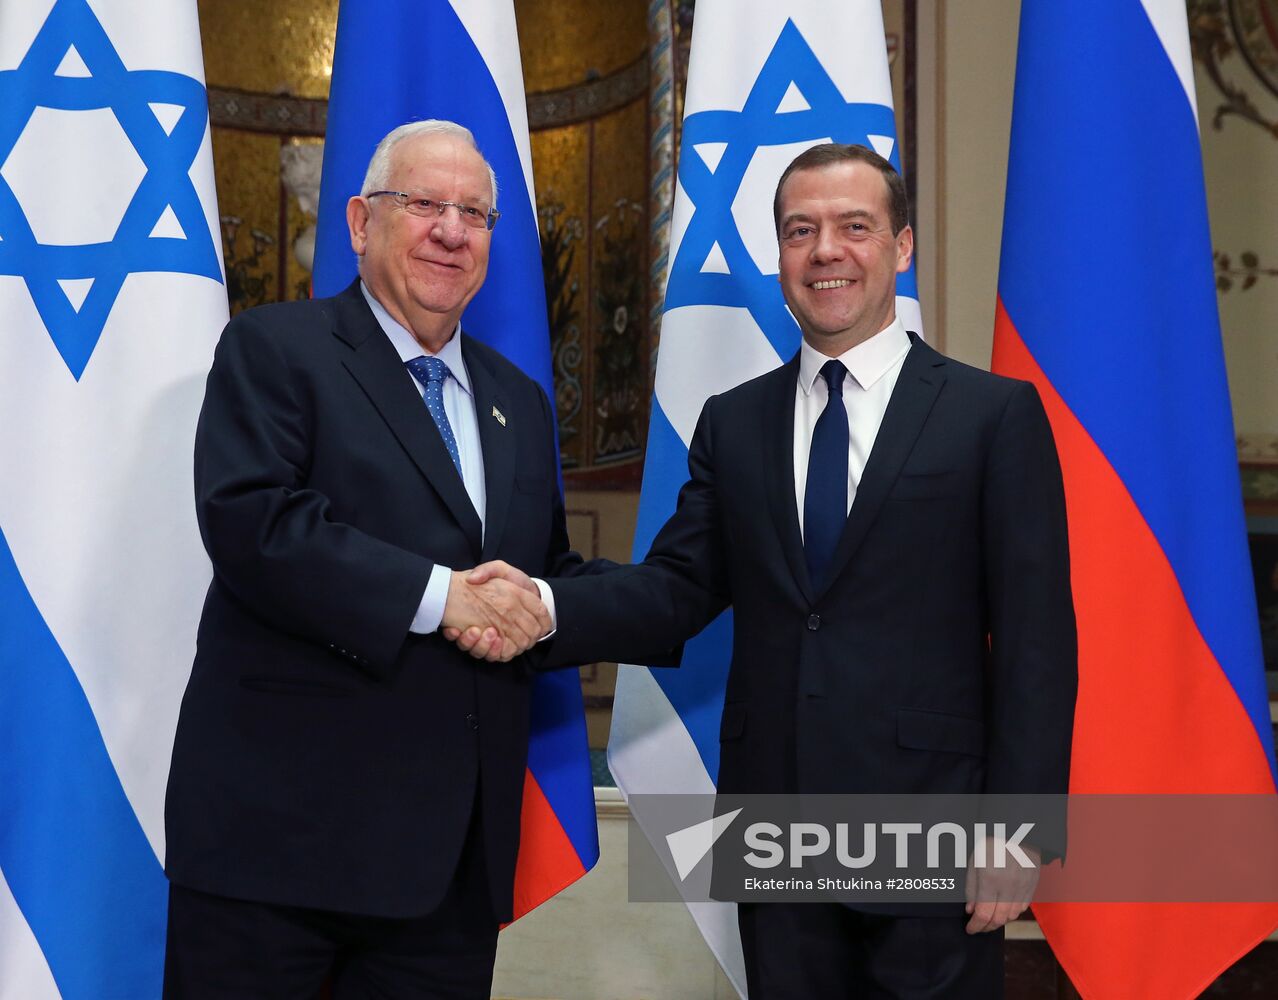 Russian Prime Minister Dmitry Medvedev meets with President of Israel Reuven Rivlin